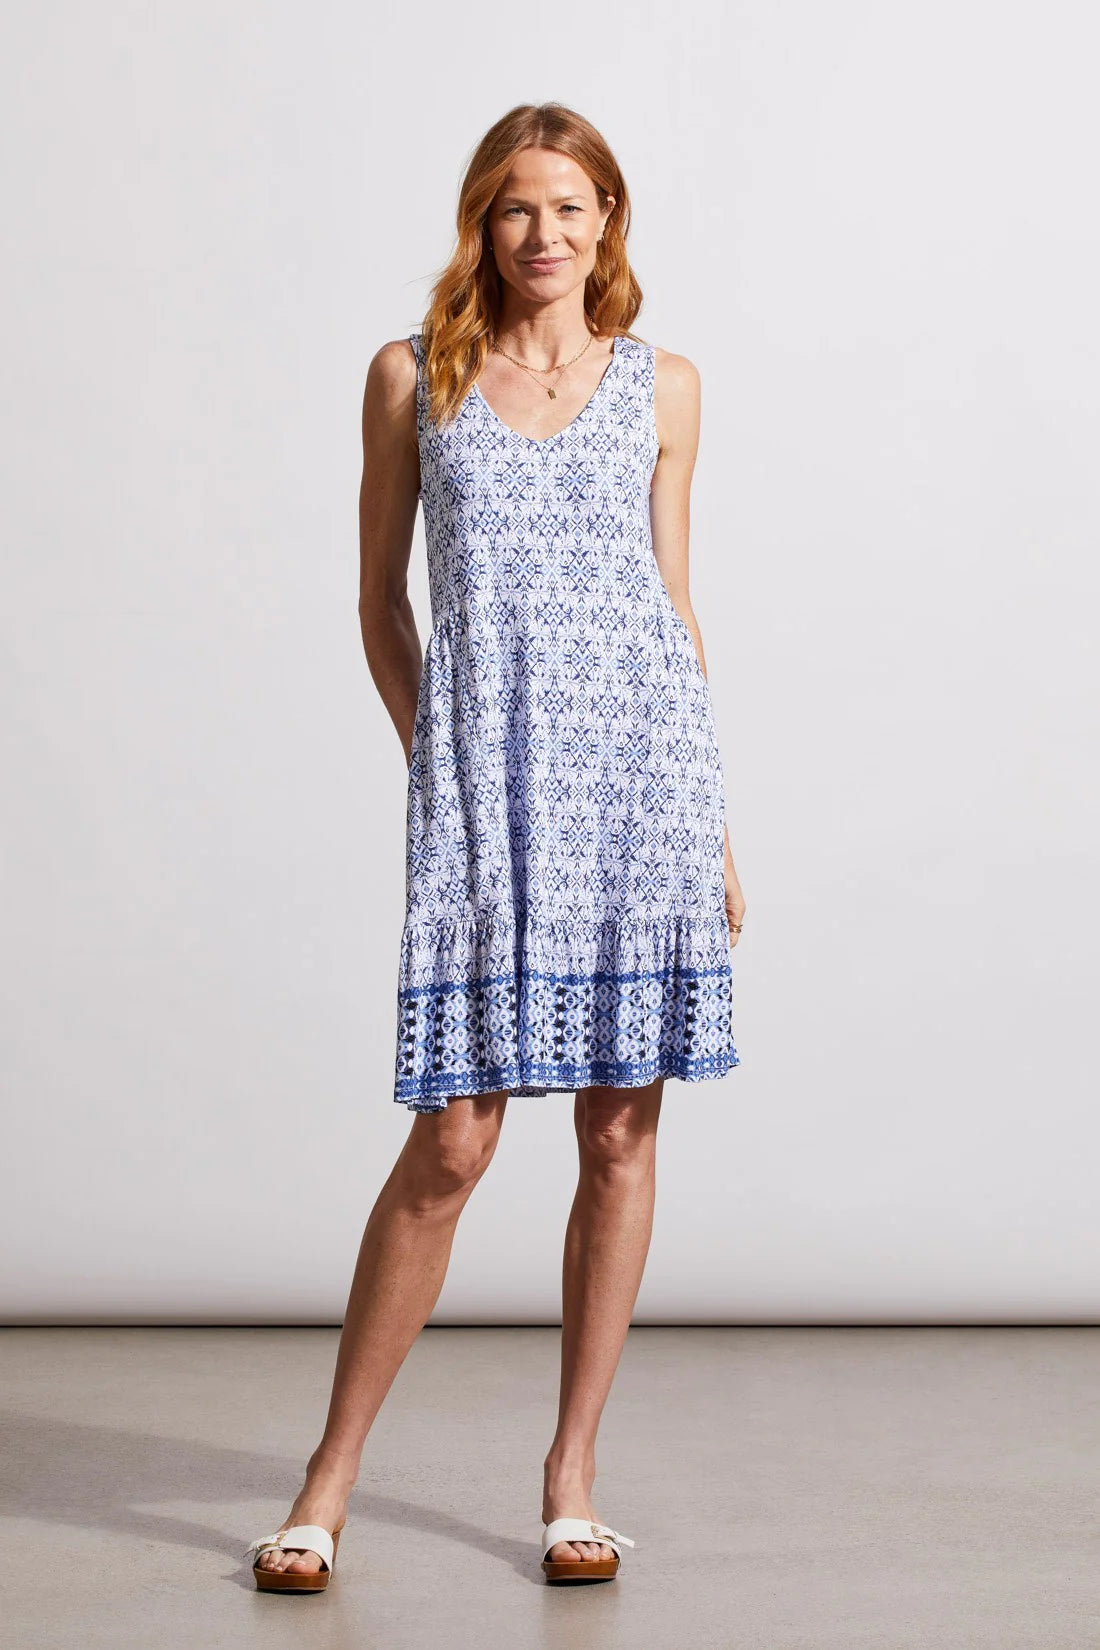 When comfort and fashion-forward style combine, they're a match made in heaven, and this flowy dress is the answer to our prayers. We're obsessed with the airy fit and sleeveless cut that flatters all day long, v-neckline, 36" length, side-seam pockets, and stretchy jersey fabric showing off a bold design. It's easy, breezy, and stylish.